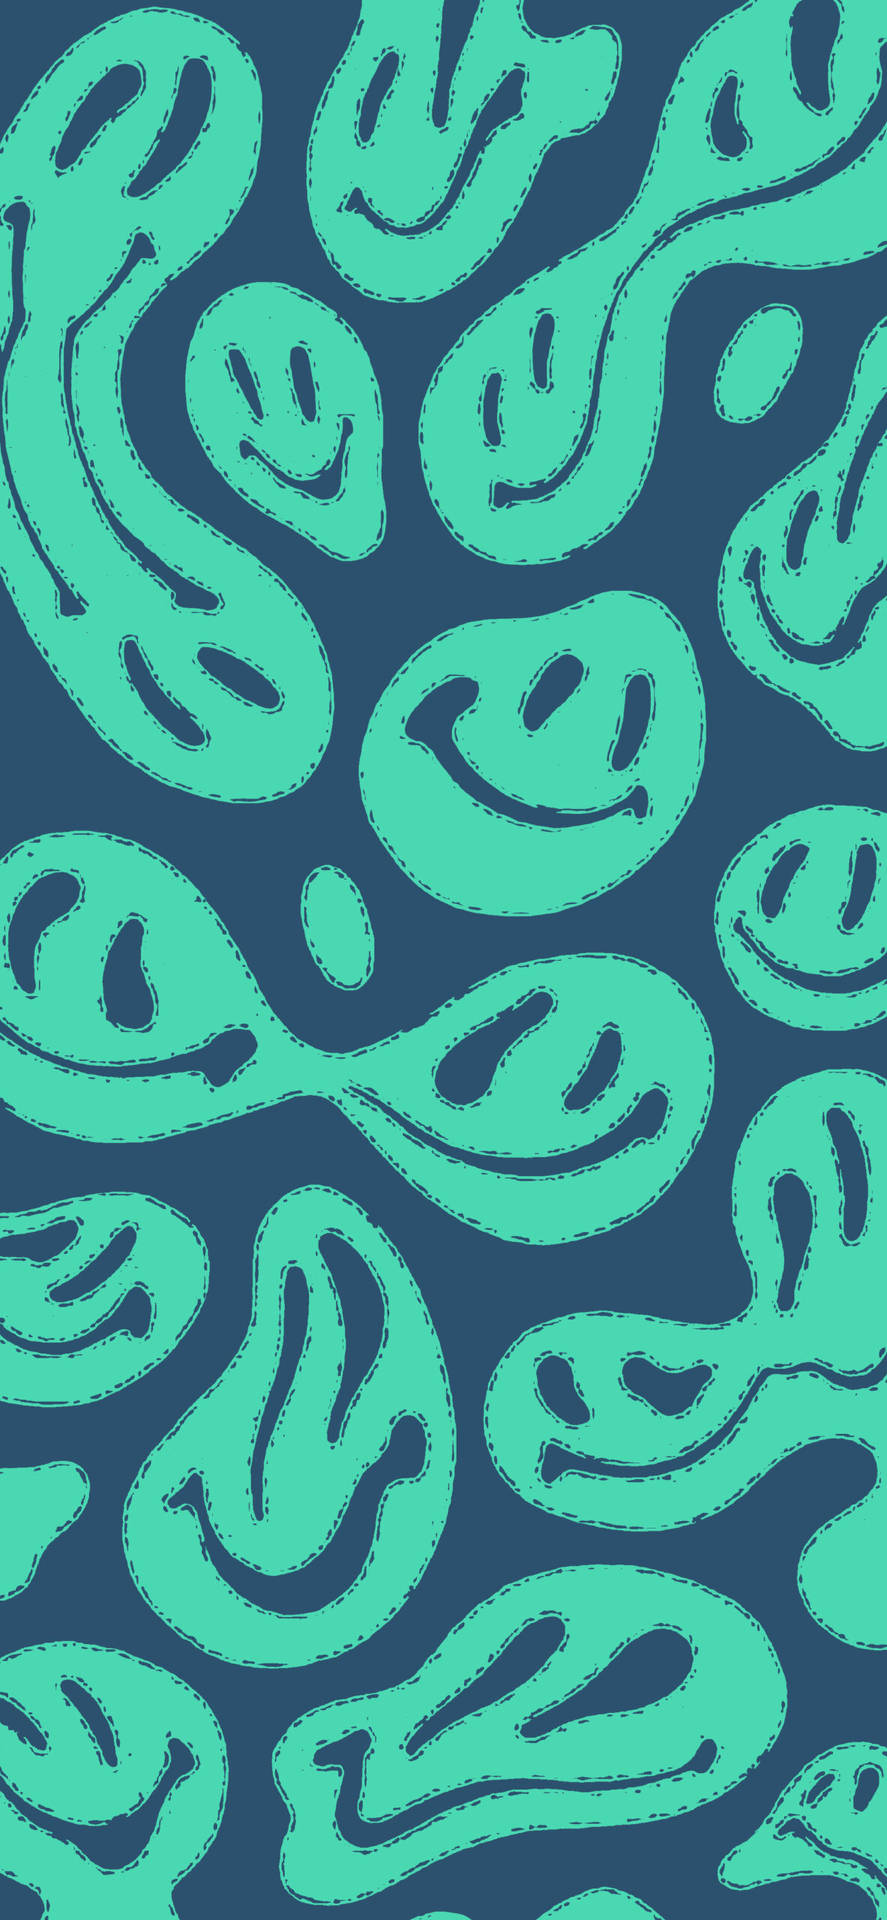 Trippy Aesthetic Blue Distorted Smiley Wallpaper